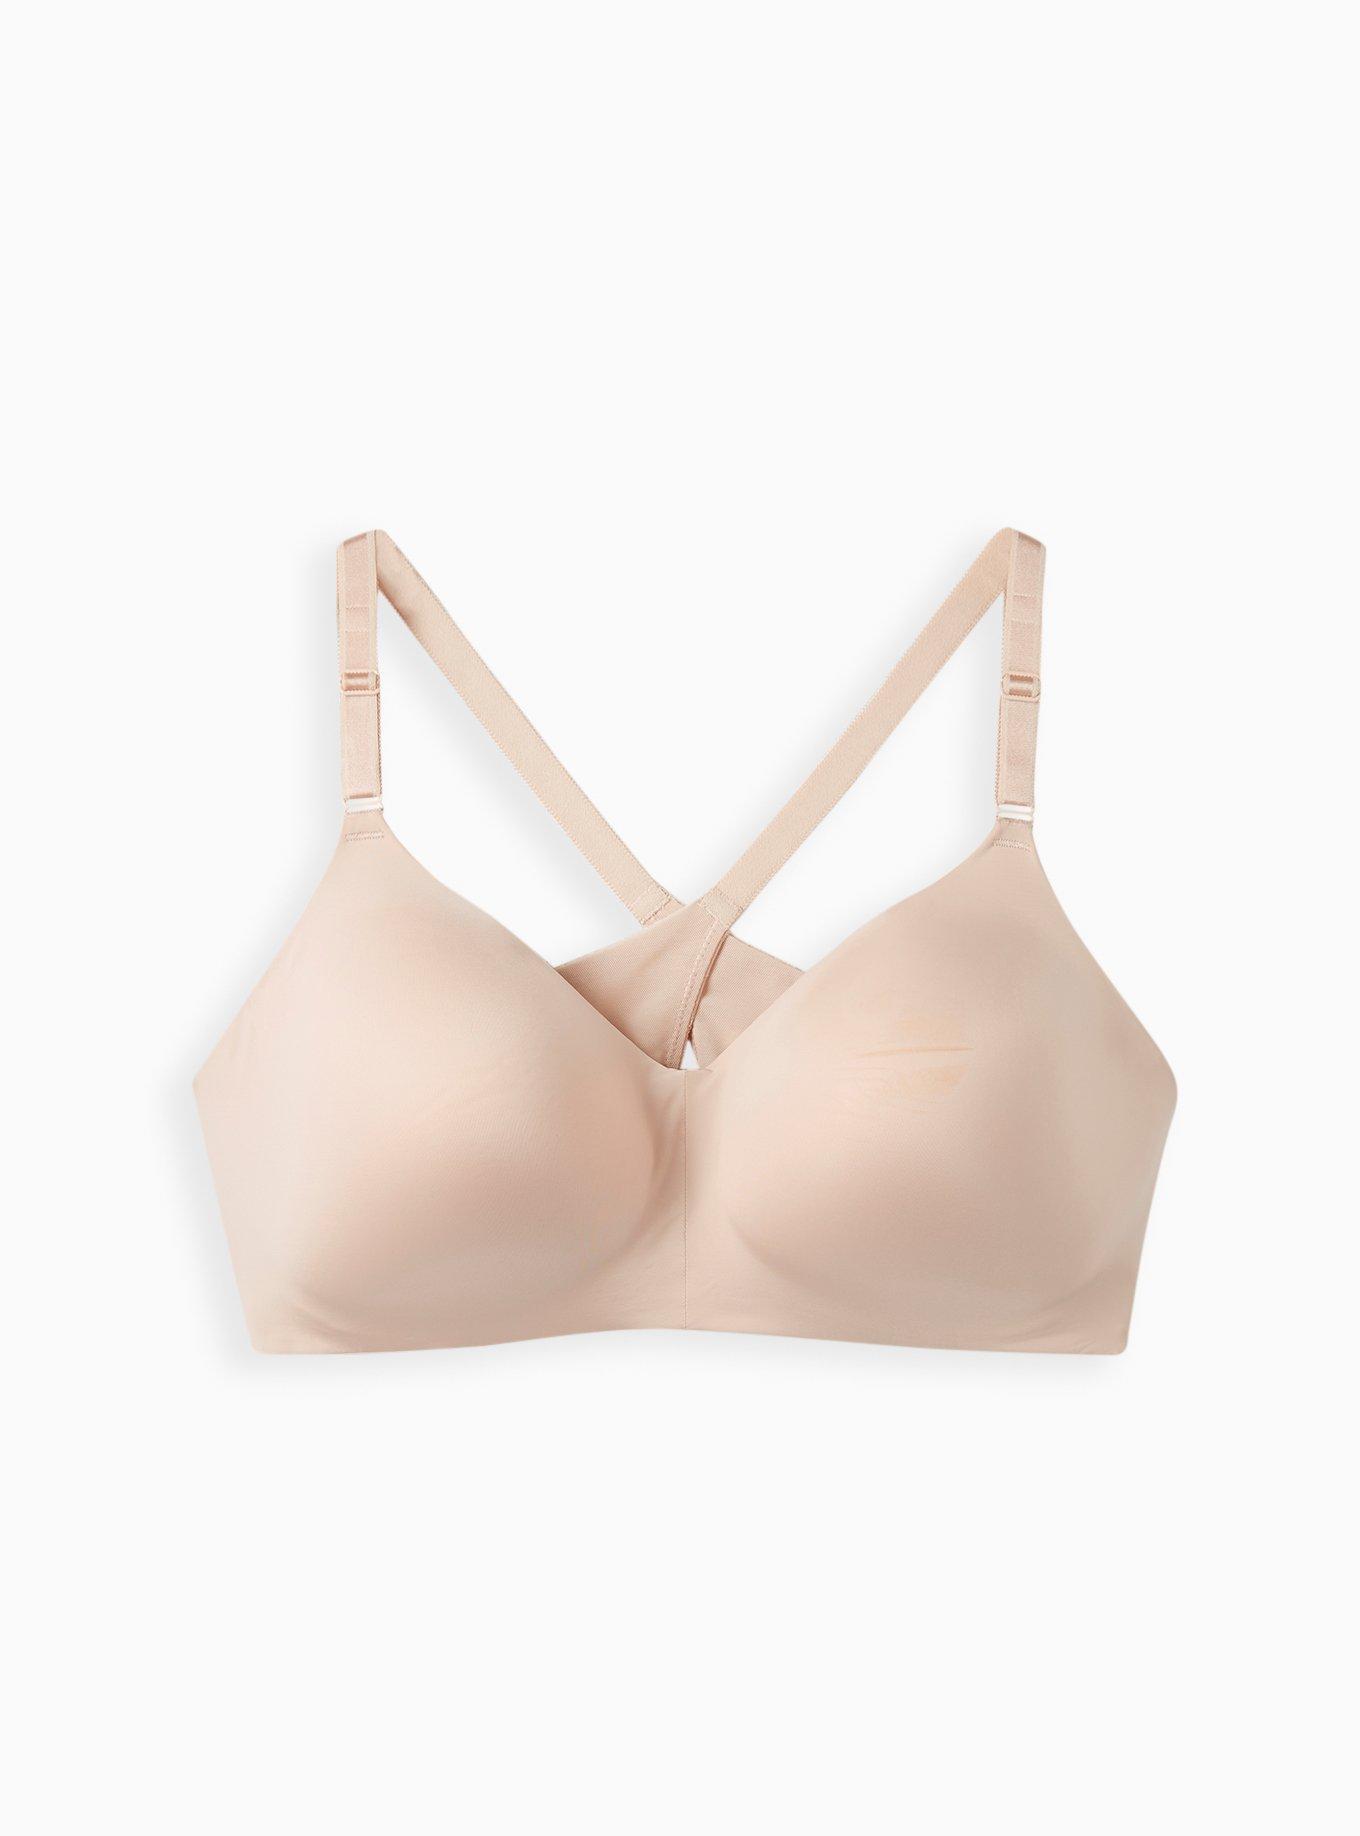 I'm starting a bikini/bralette project but I'm having some trouble  understanding the length. I'm a DD/DDD and I'm afraid of making too small  of a cup and I can't understand if it's